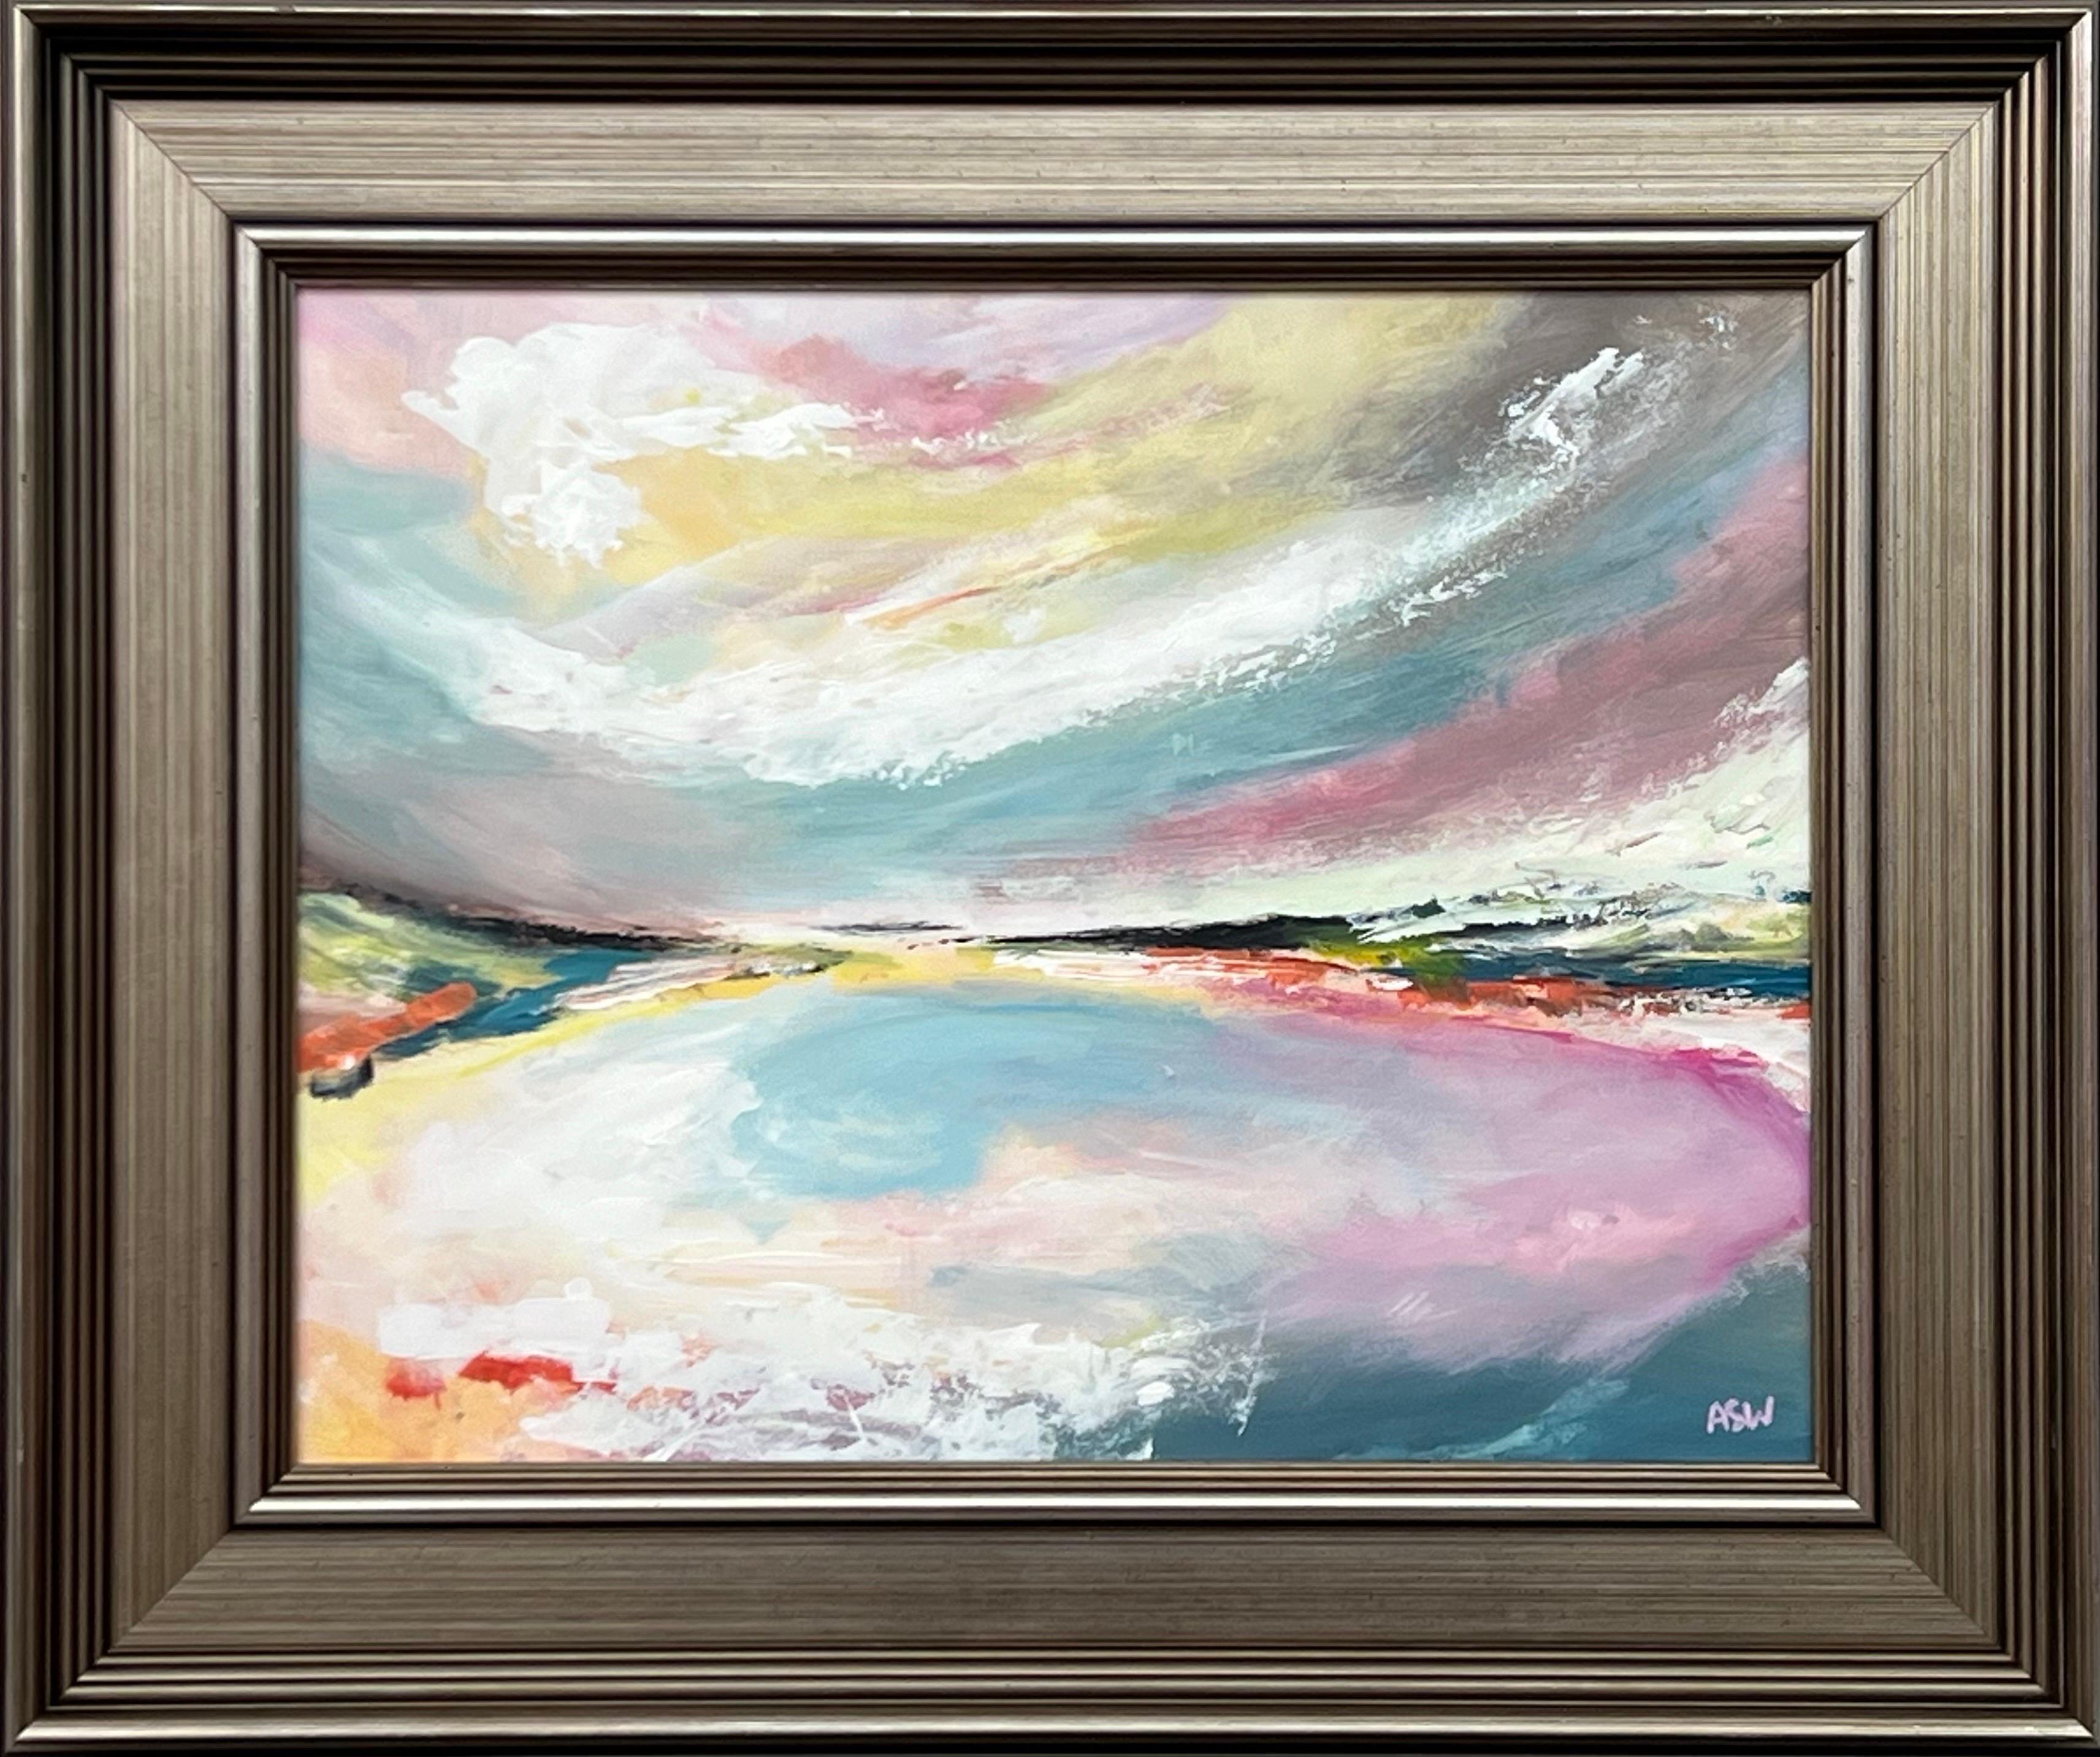 Abstract Landscape Seascape Art with Pink Blue & White Sky by British Artist